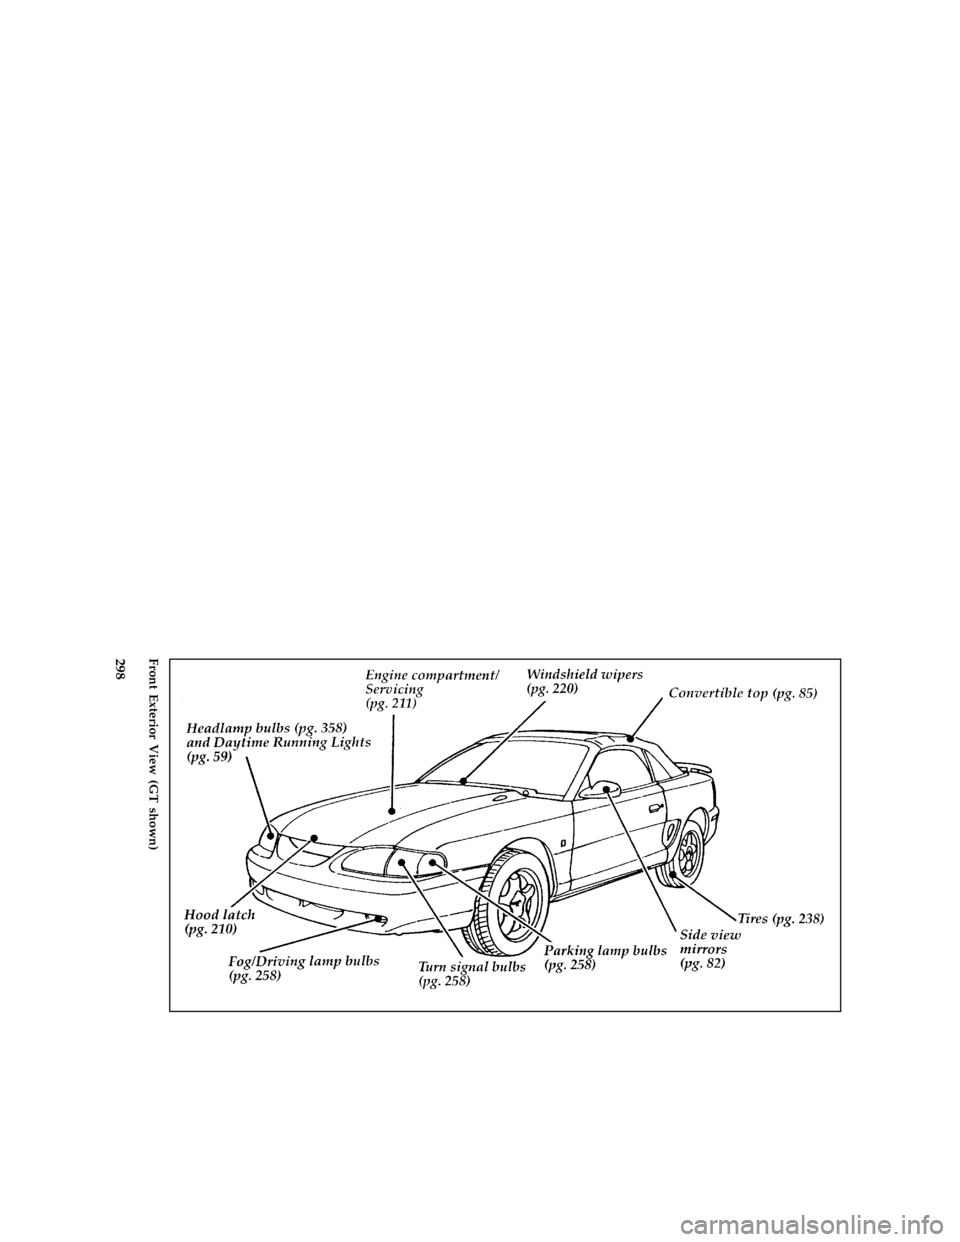 FORD MUSTANG 1997 4.G Owners Manual 298 [QI00500(M )04/96]
full page art:0011097-EFront Exterior View (GT shown)
File:16rcqim.ex
Update:Thu Apr  3 07:51:37 1997 